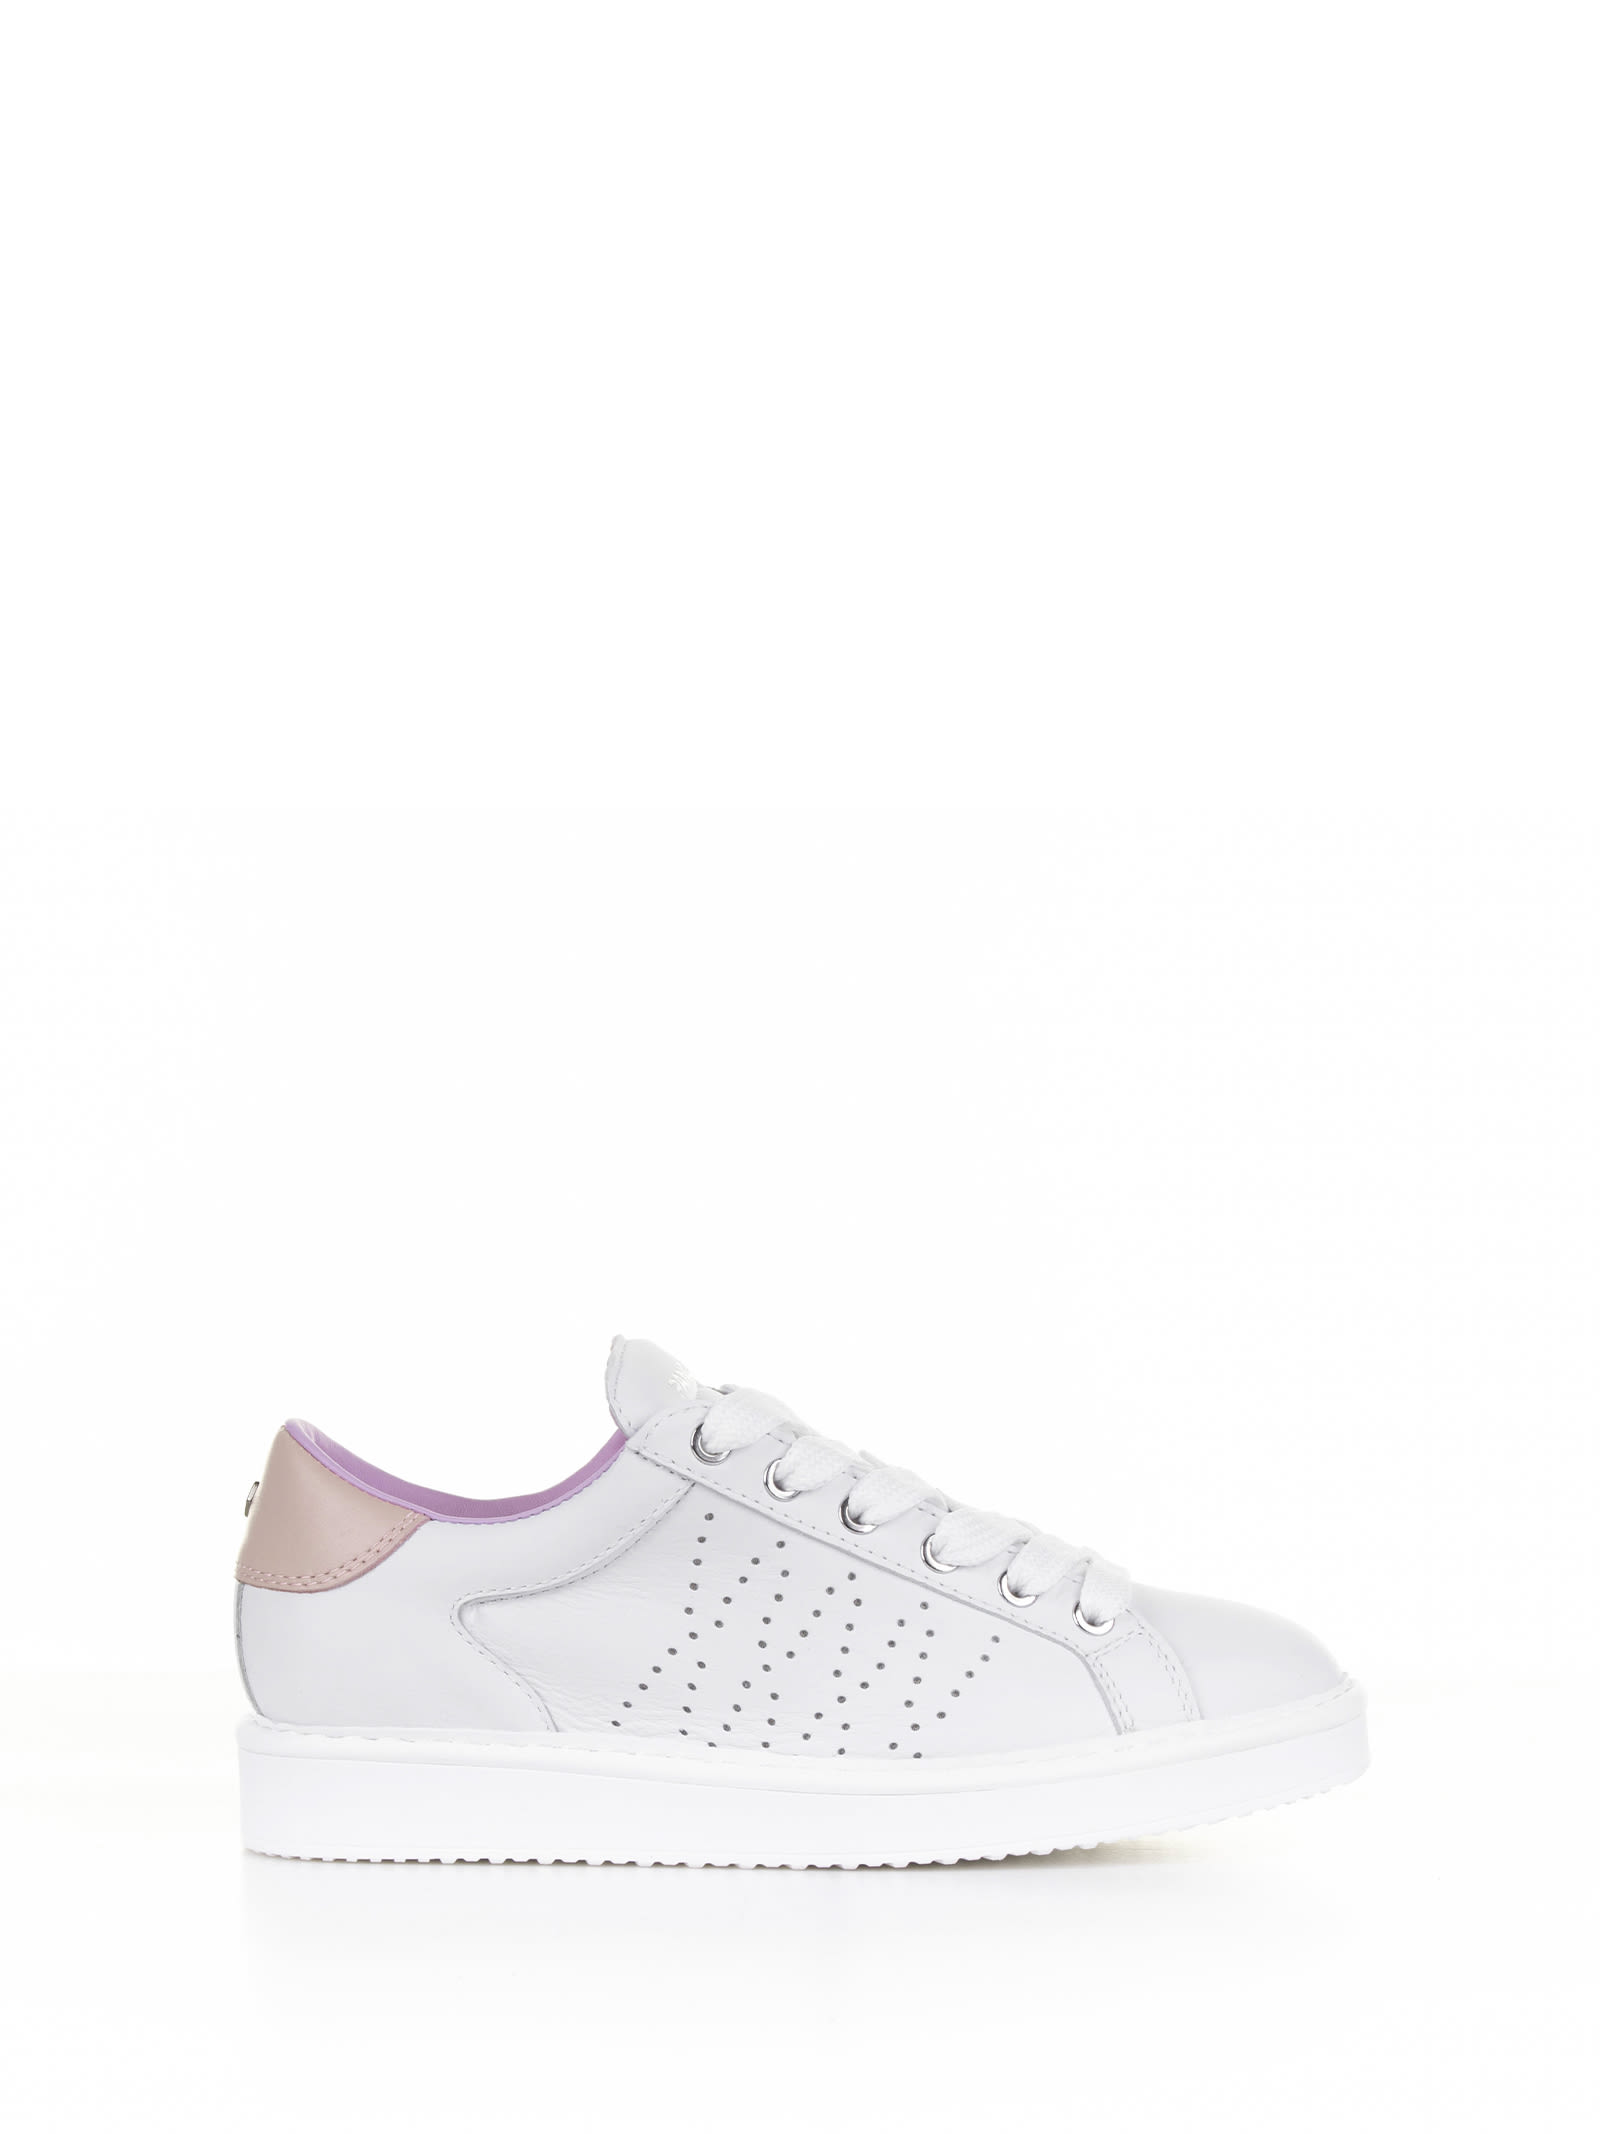 White Leather Sneaker And Pink Heel